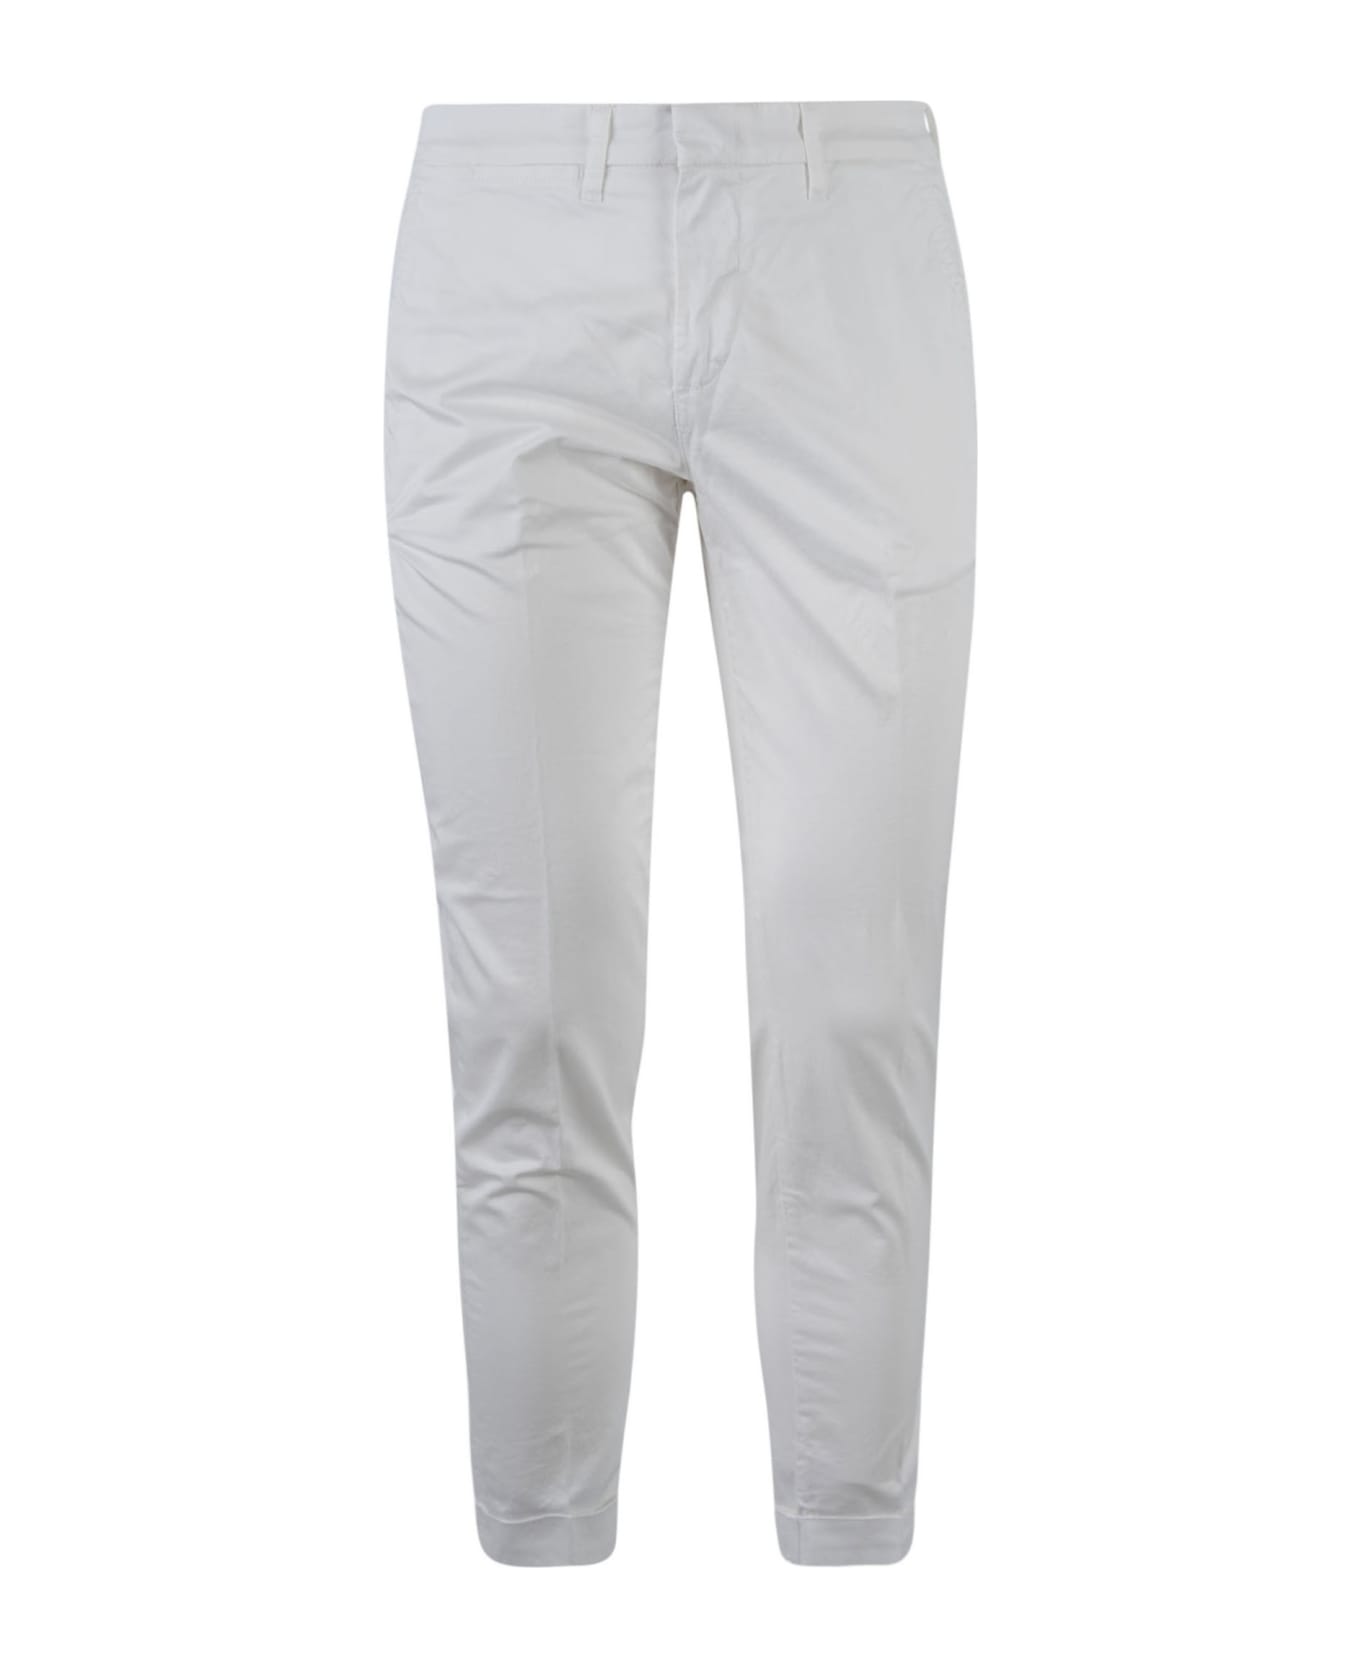 Fay Regular Fit Plain Trousers Fay - WHITE